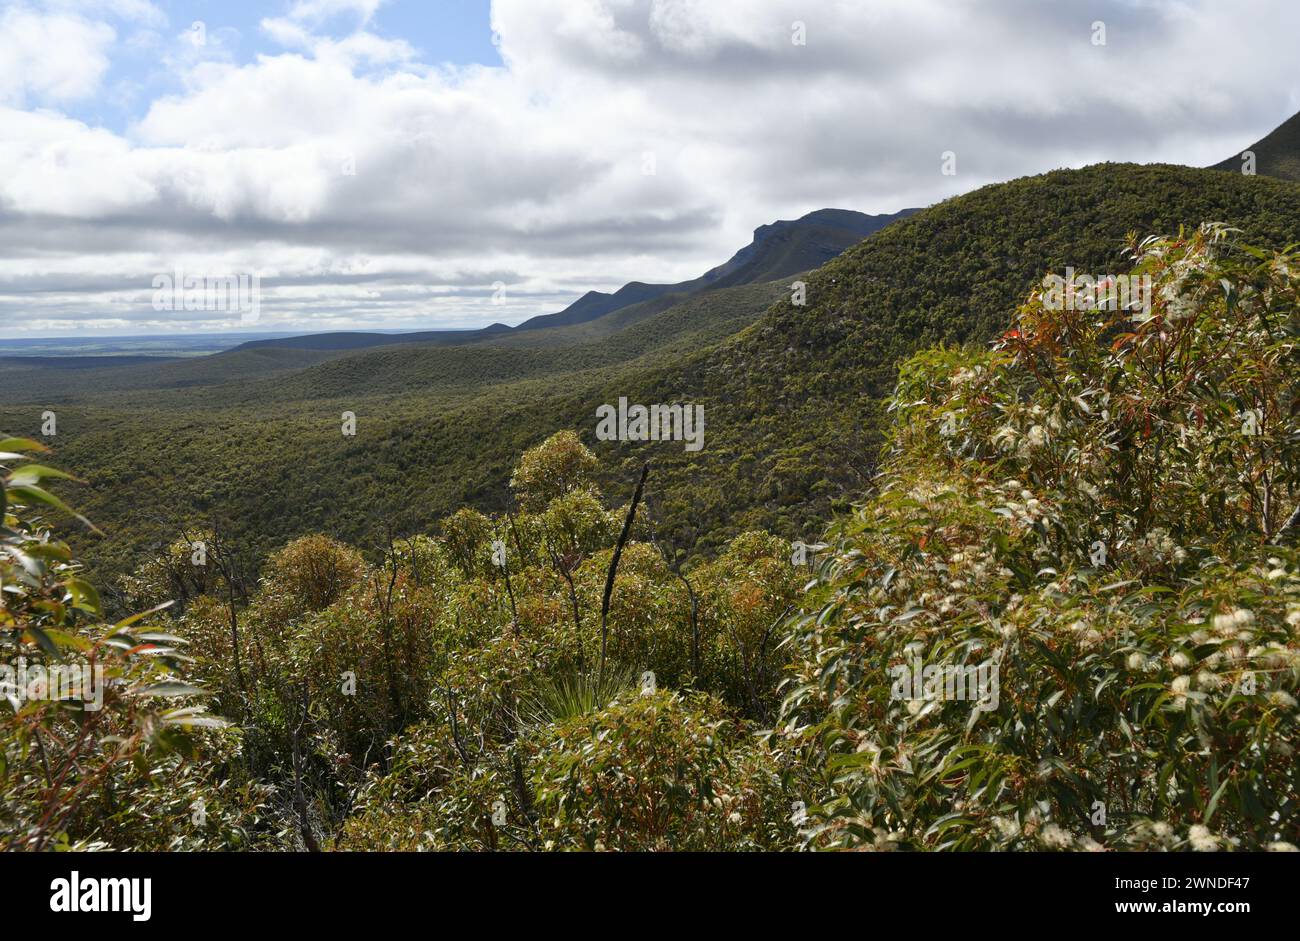 View of the Stirling Range Mountains at the start of Bluff Knoll hiking trail Stock Photo